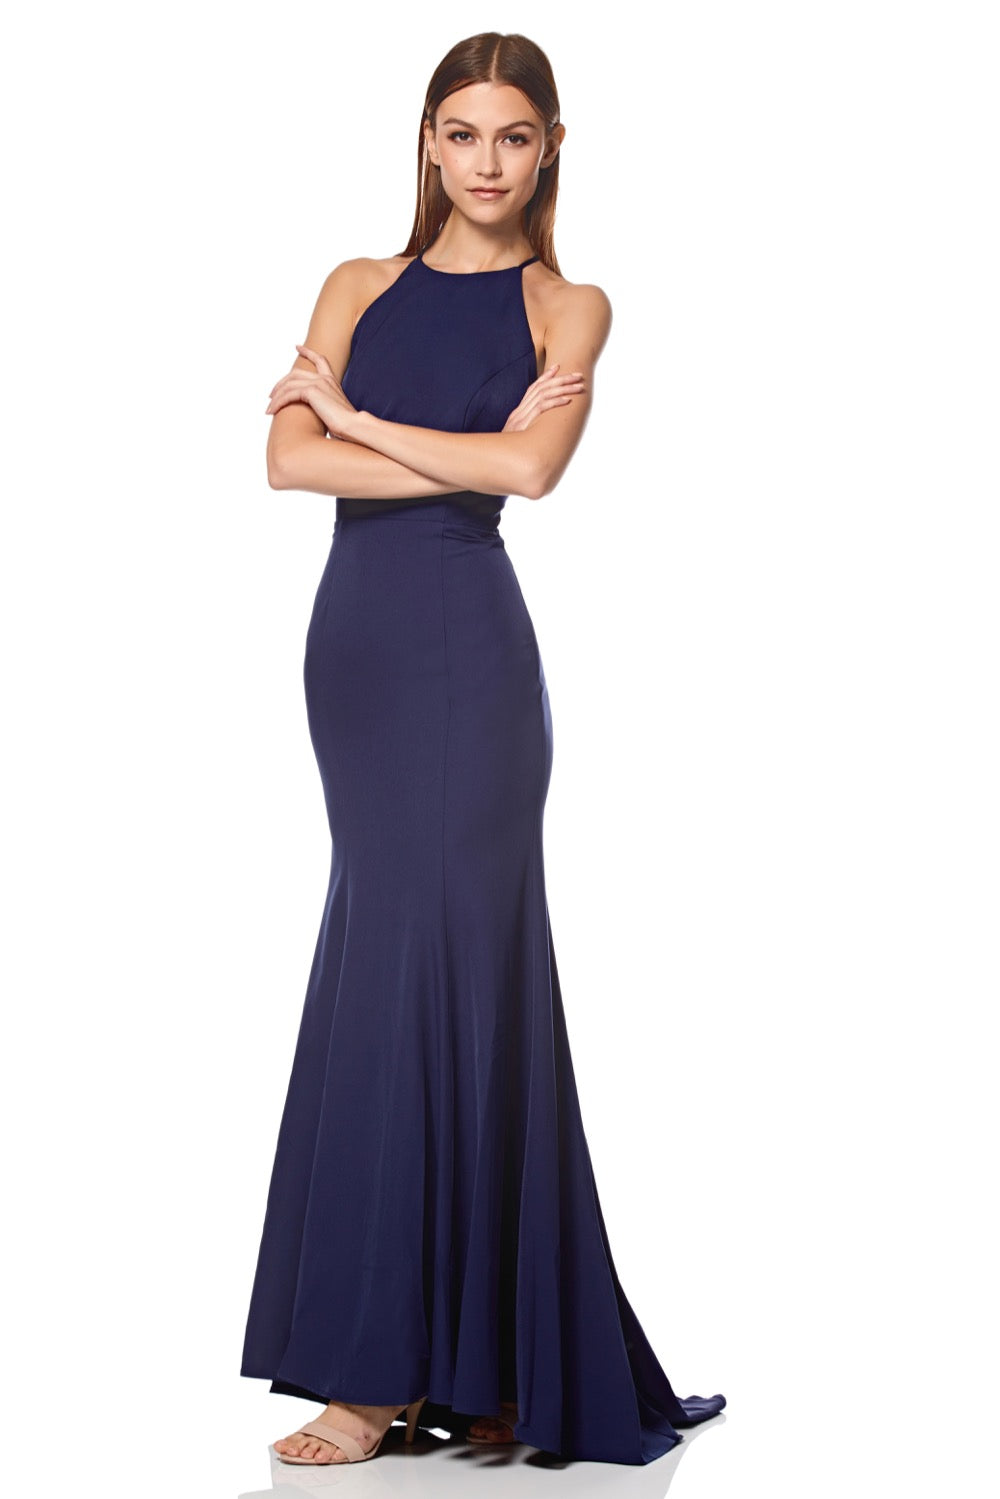 Jarlo navy high neck maxi dress with open lace back detail